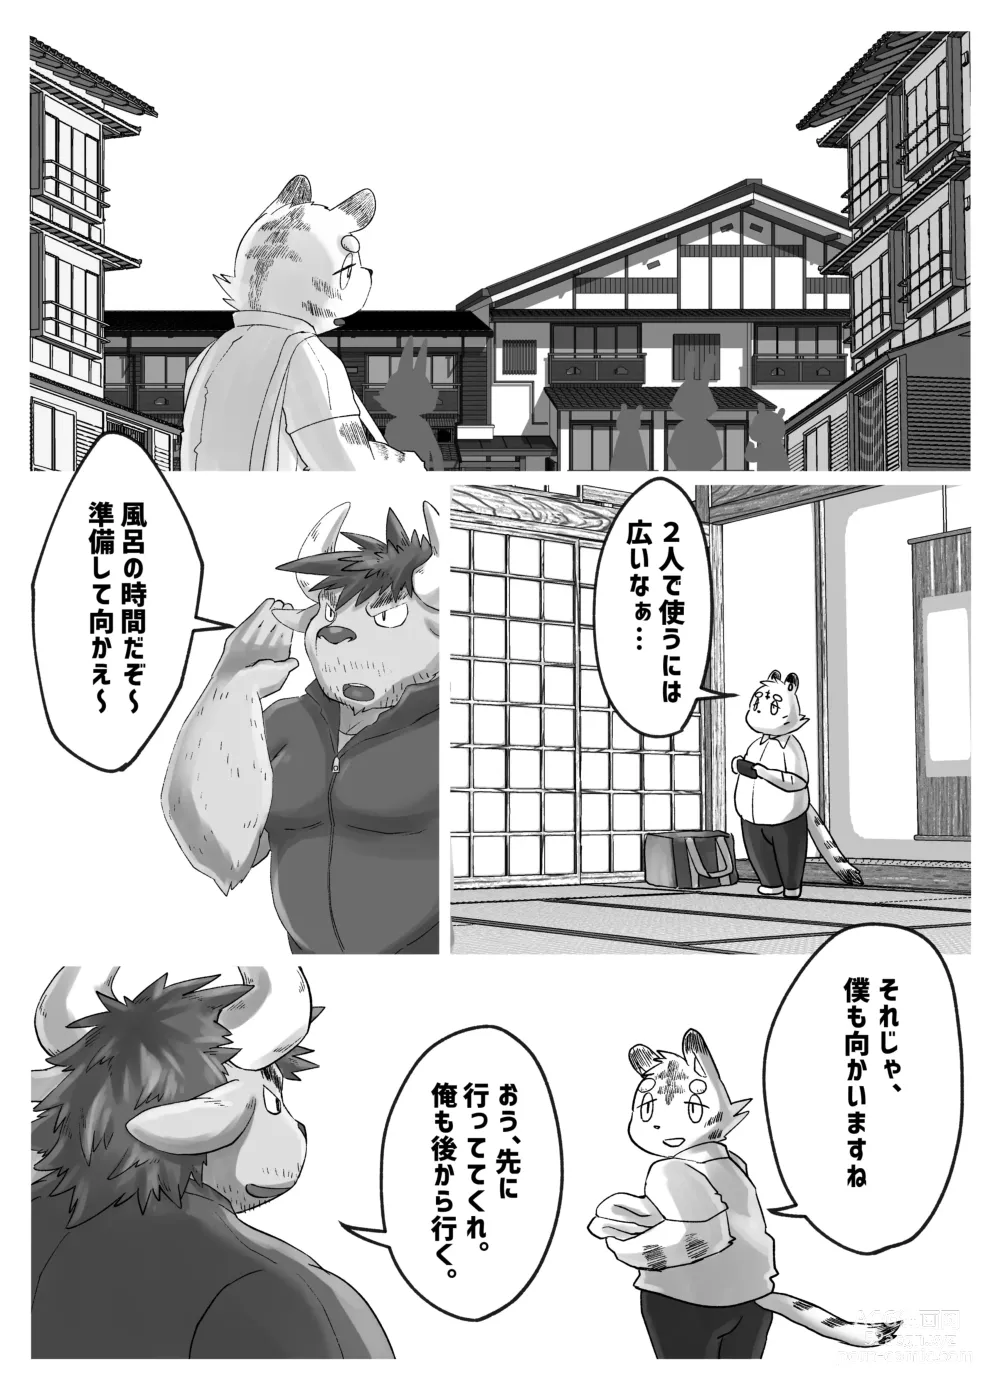 Page 6 of doujinshi Muscular Bull Teacher & Chubby Tiger Student 3